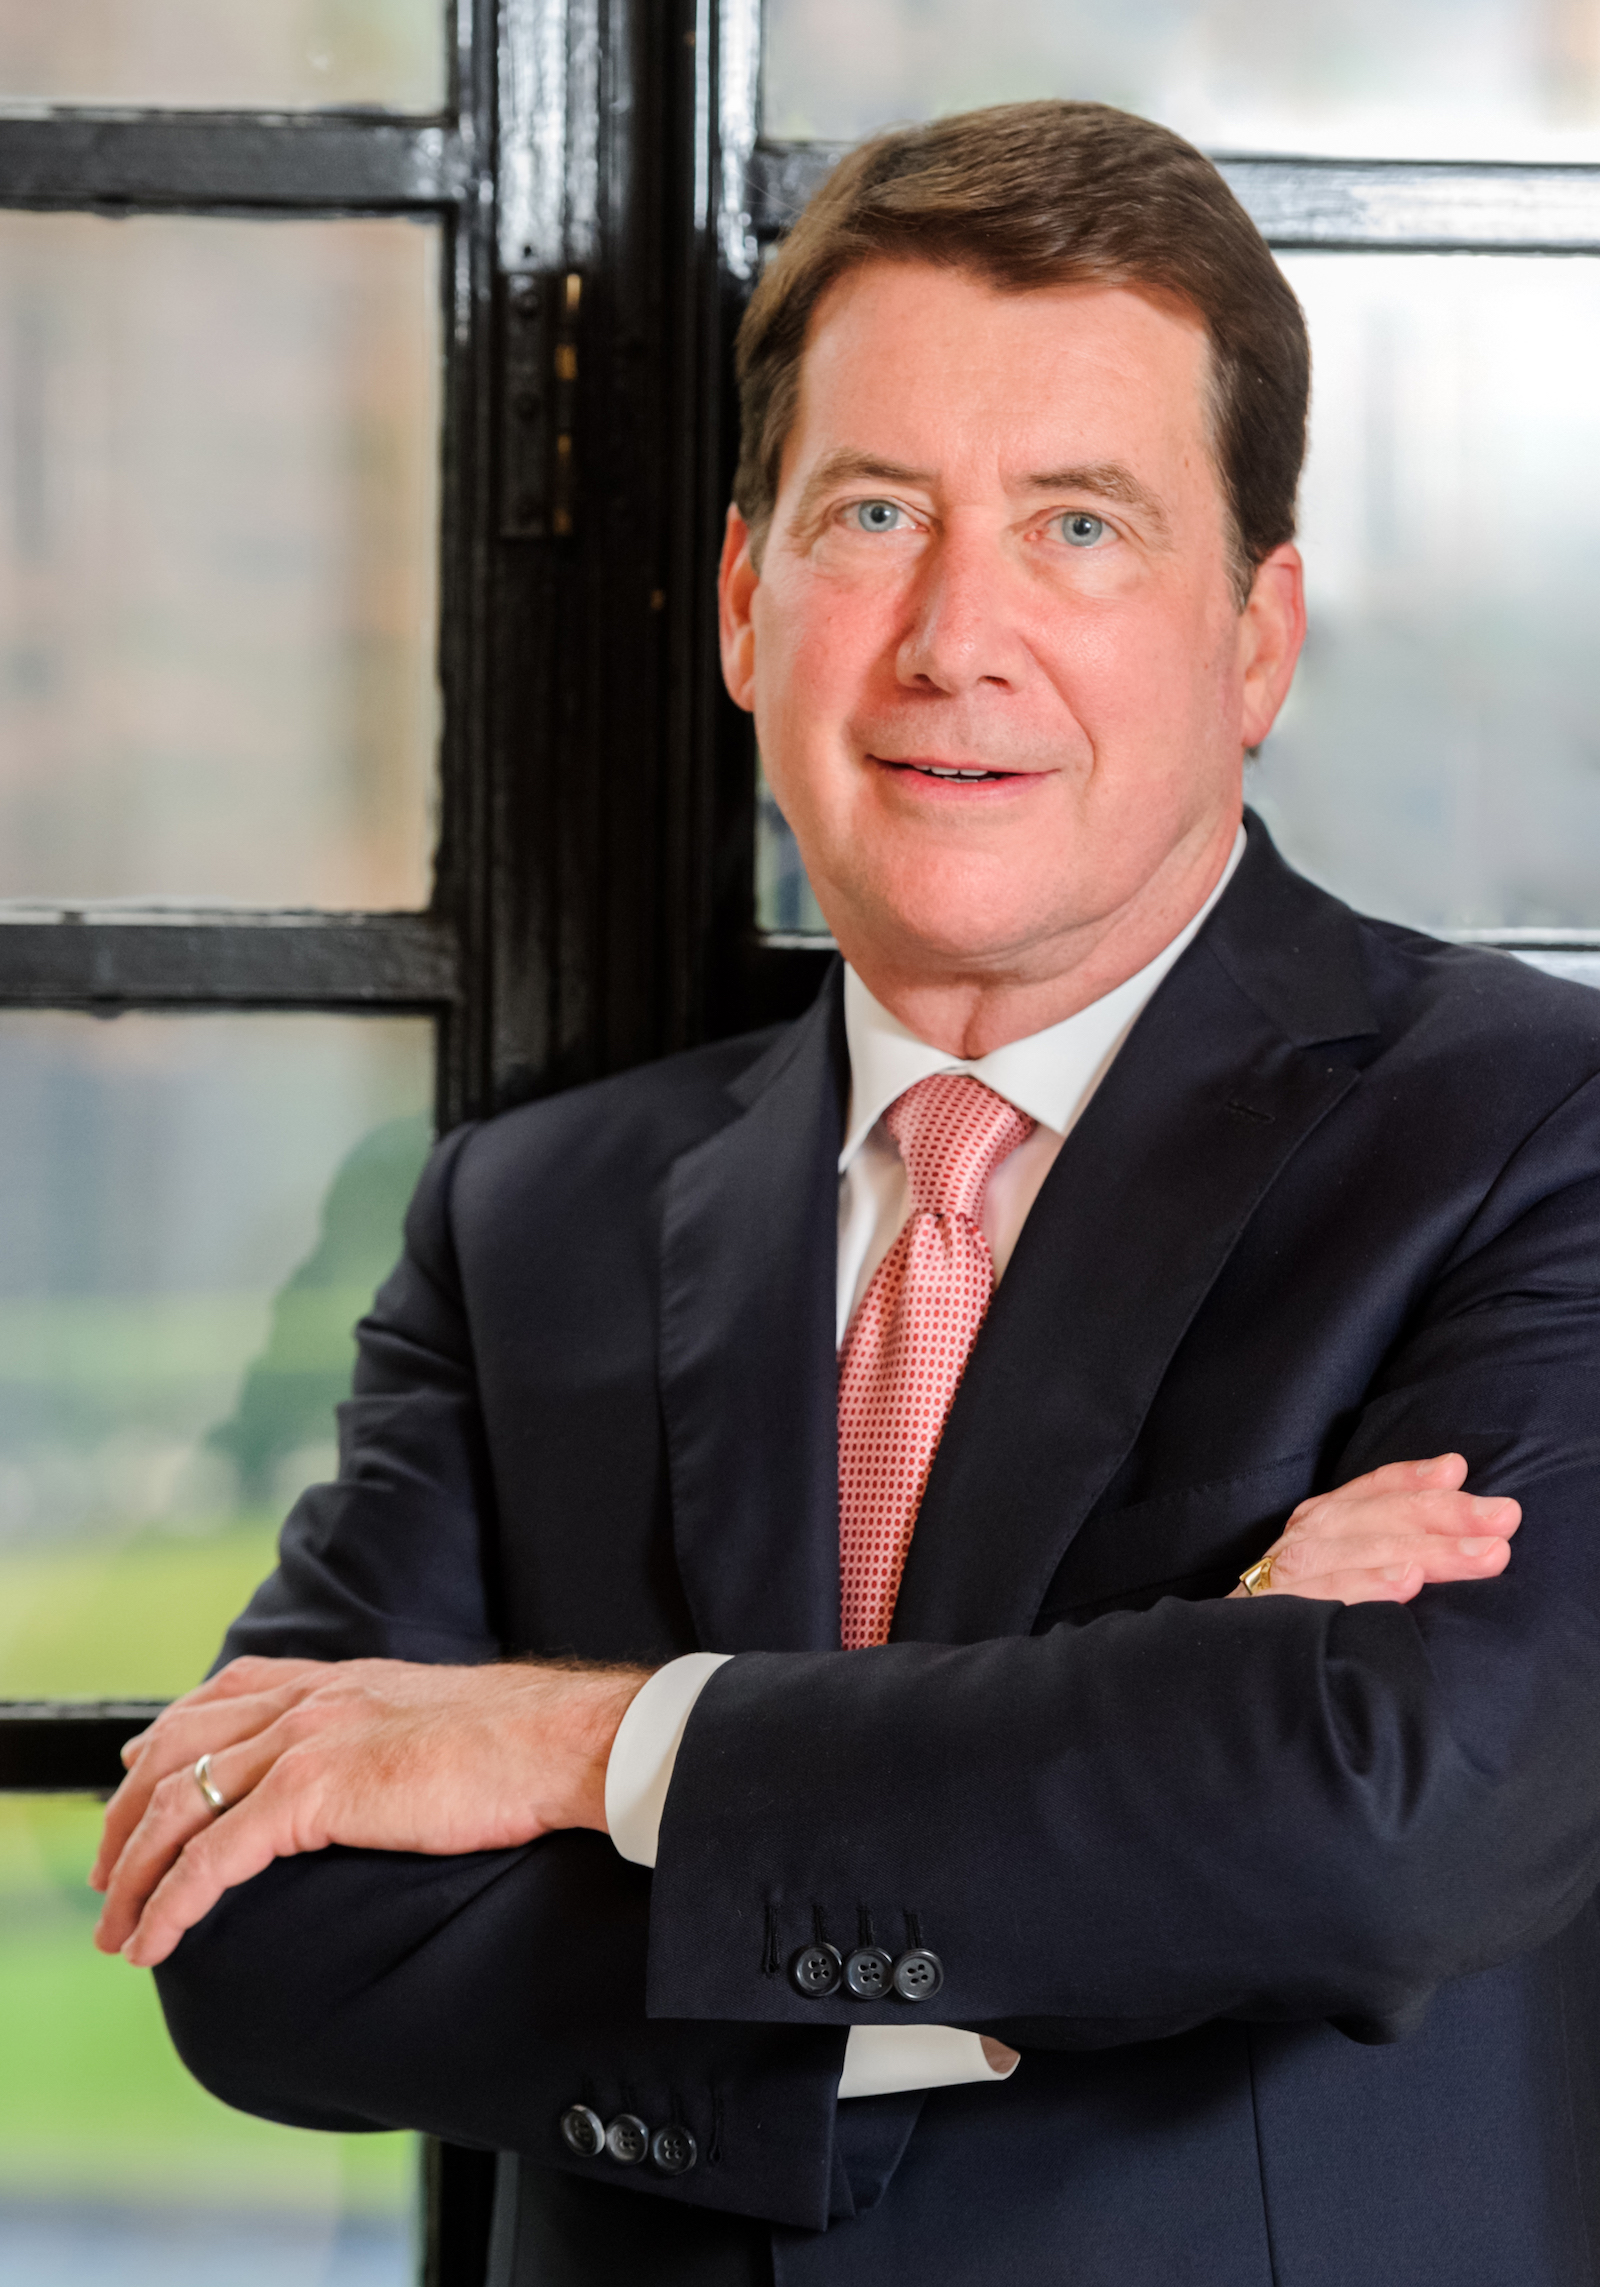 INTERVIEW, 'Keep a Focus on China' — Former Envoy William Hagerty on  Japan-U.S. Partnership